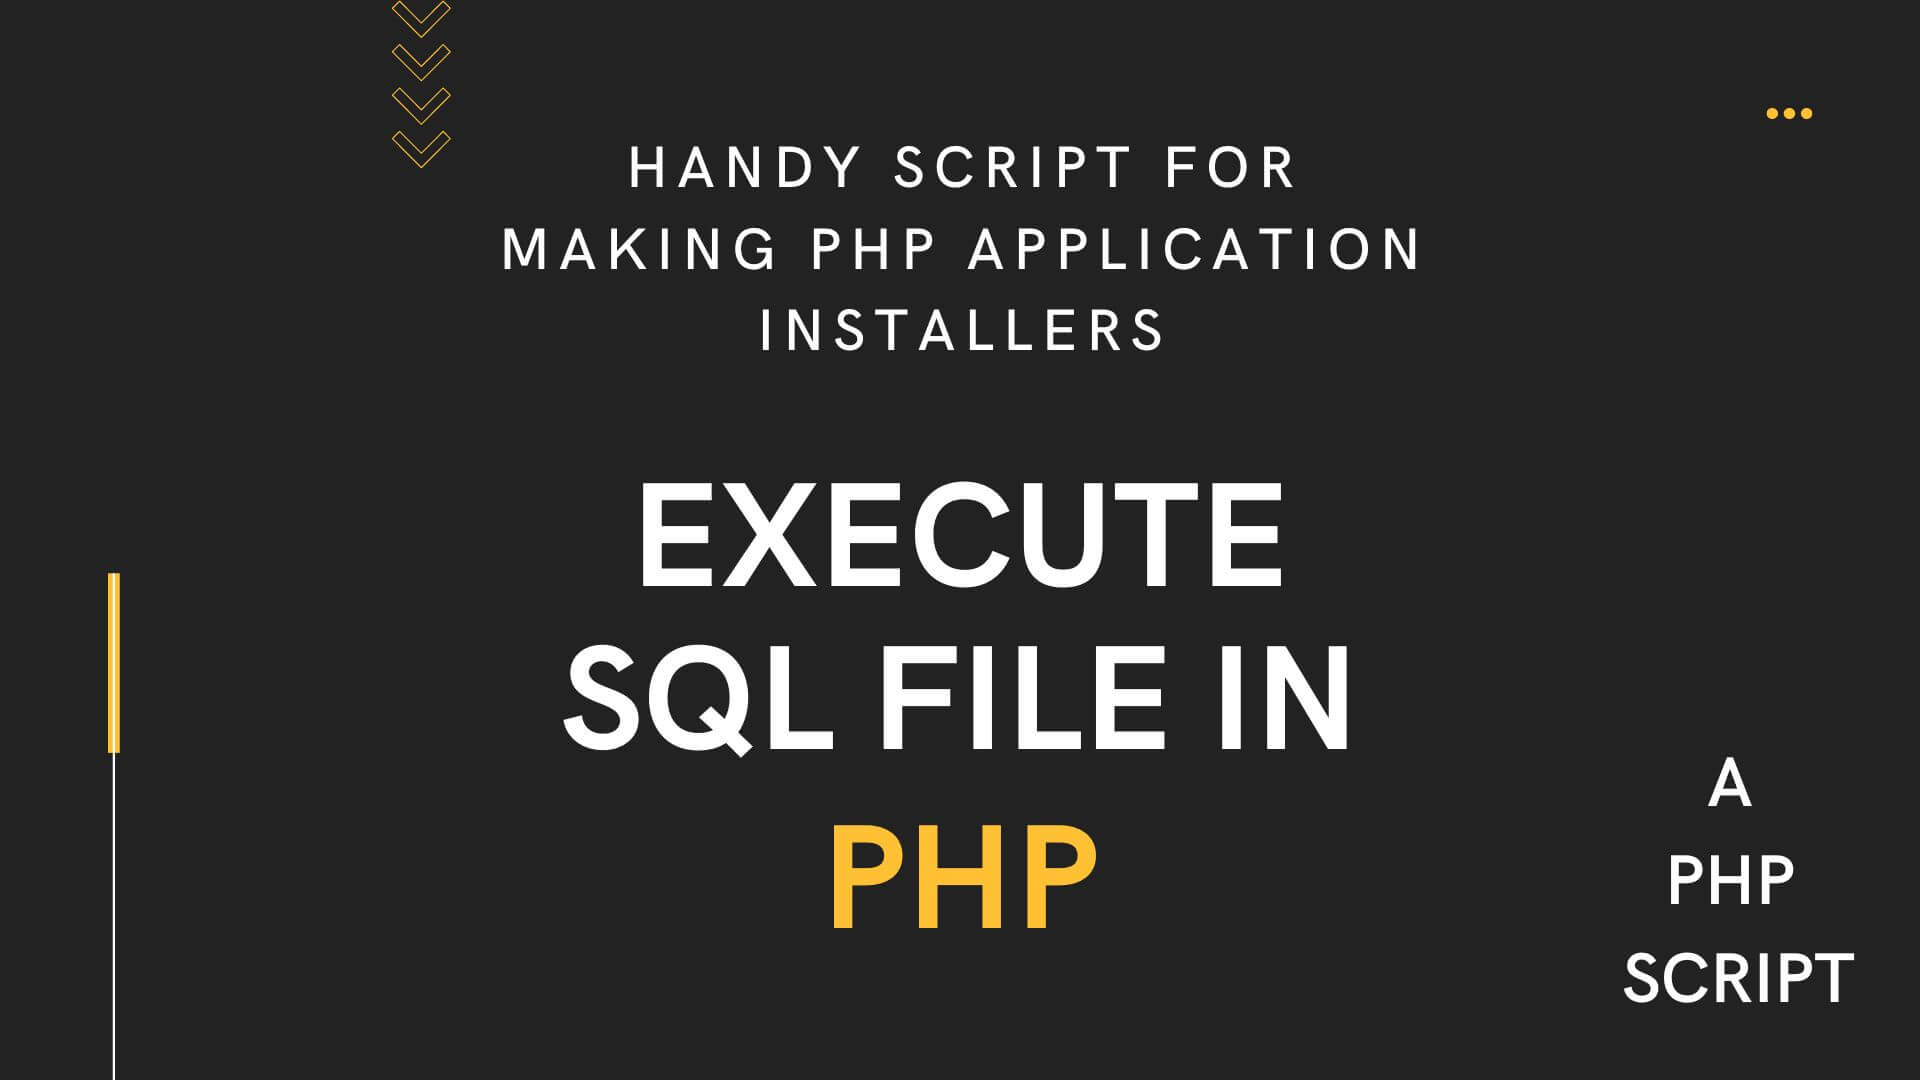 How to execute SQL file in PHP